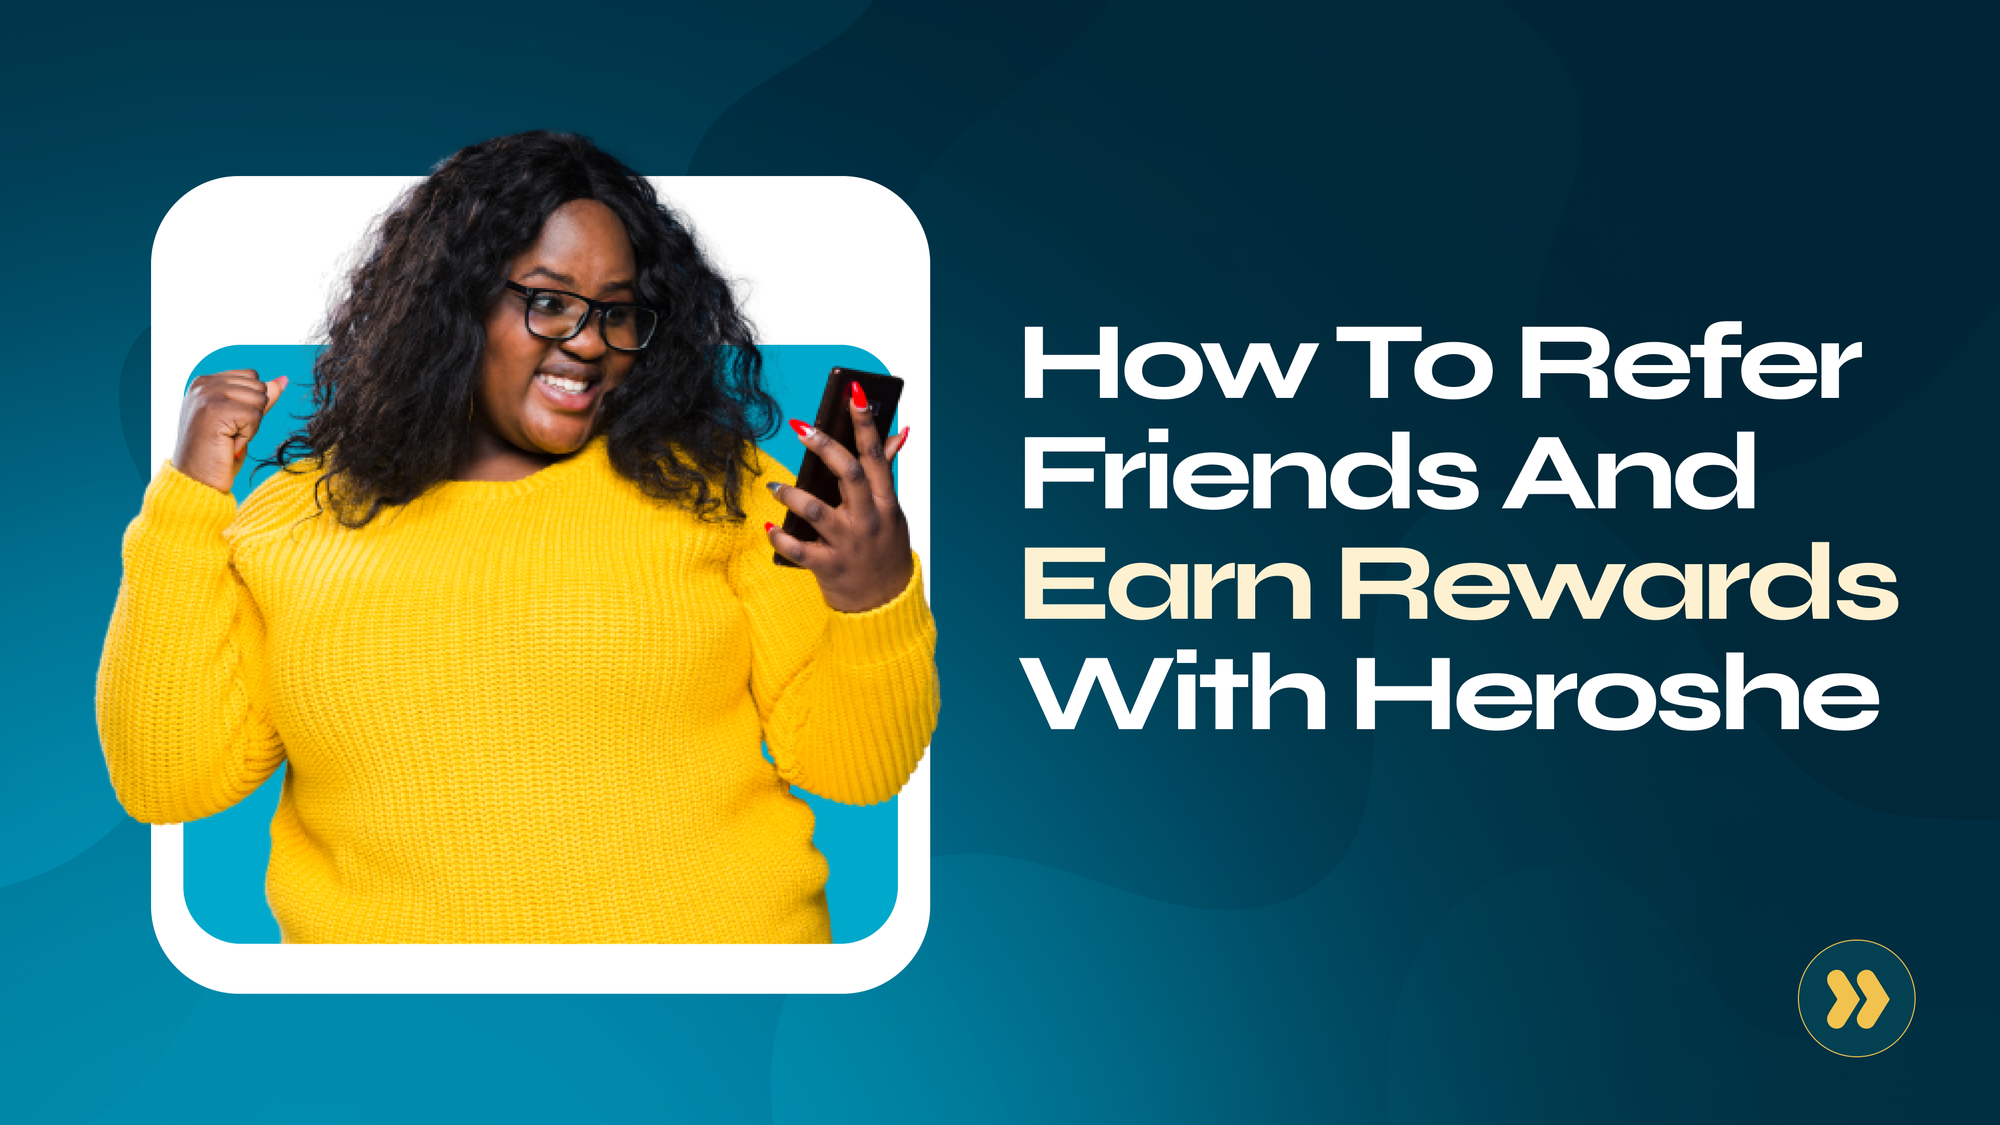 How to Refer Friends and Earn Rewards with Heroshe